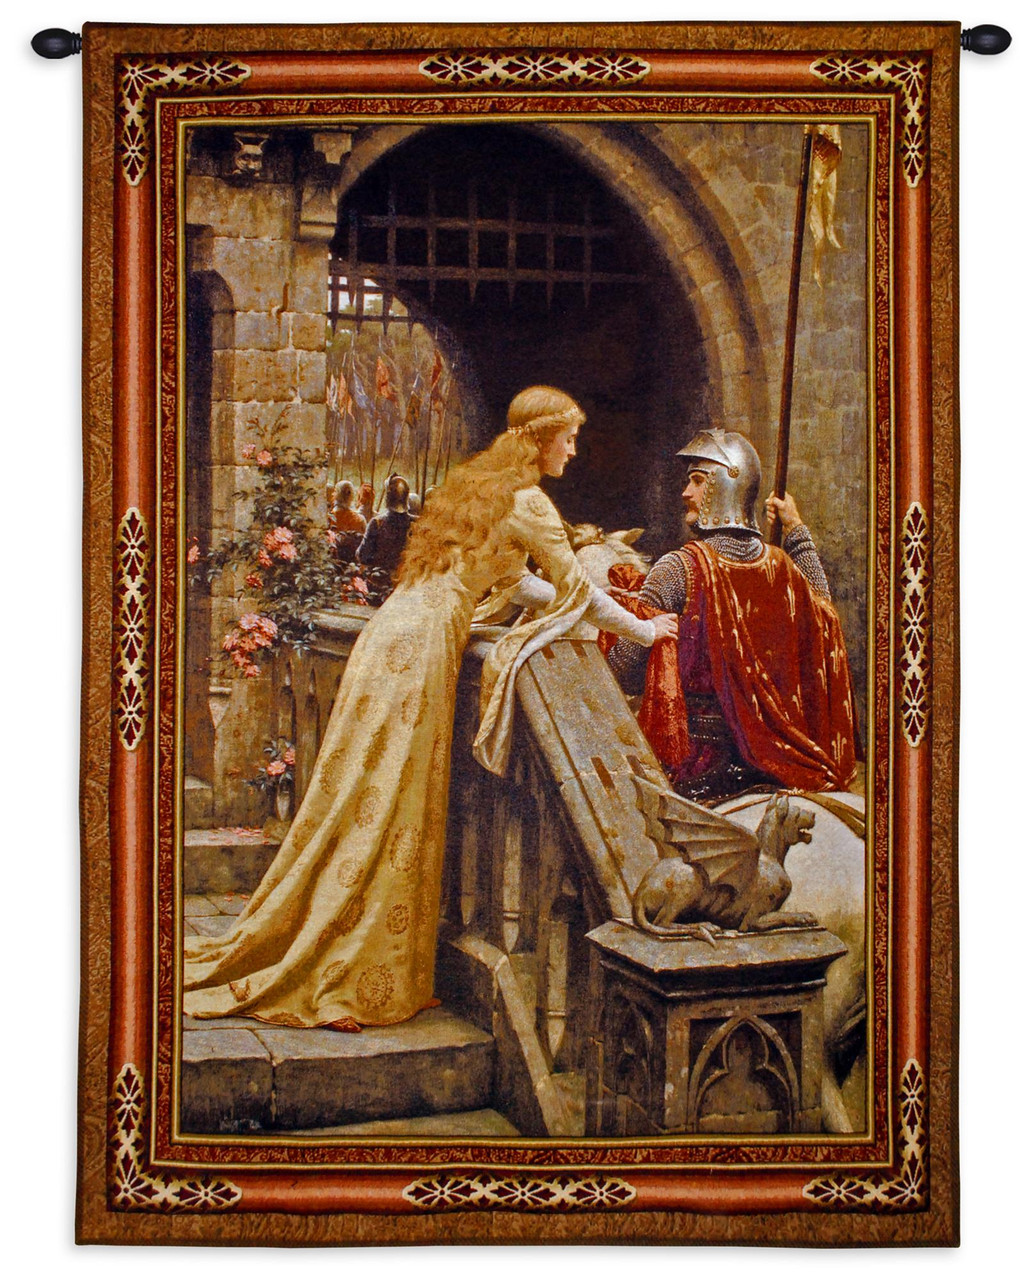 Godspeed Edmund Blair Leighton Woven Tapestry Wall Art Hanging Medieval  Lady with Arthurian Knight 100% Cotton USA Size 40x31